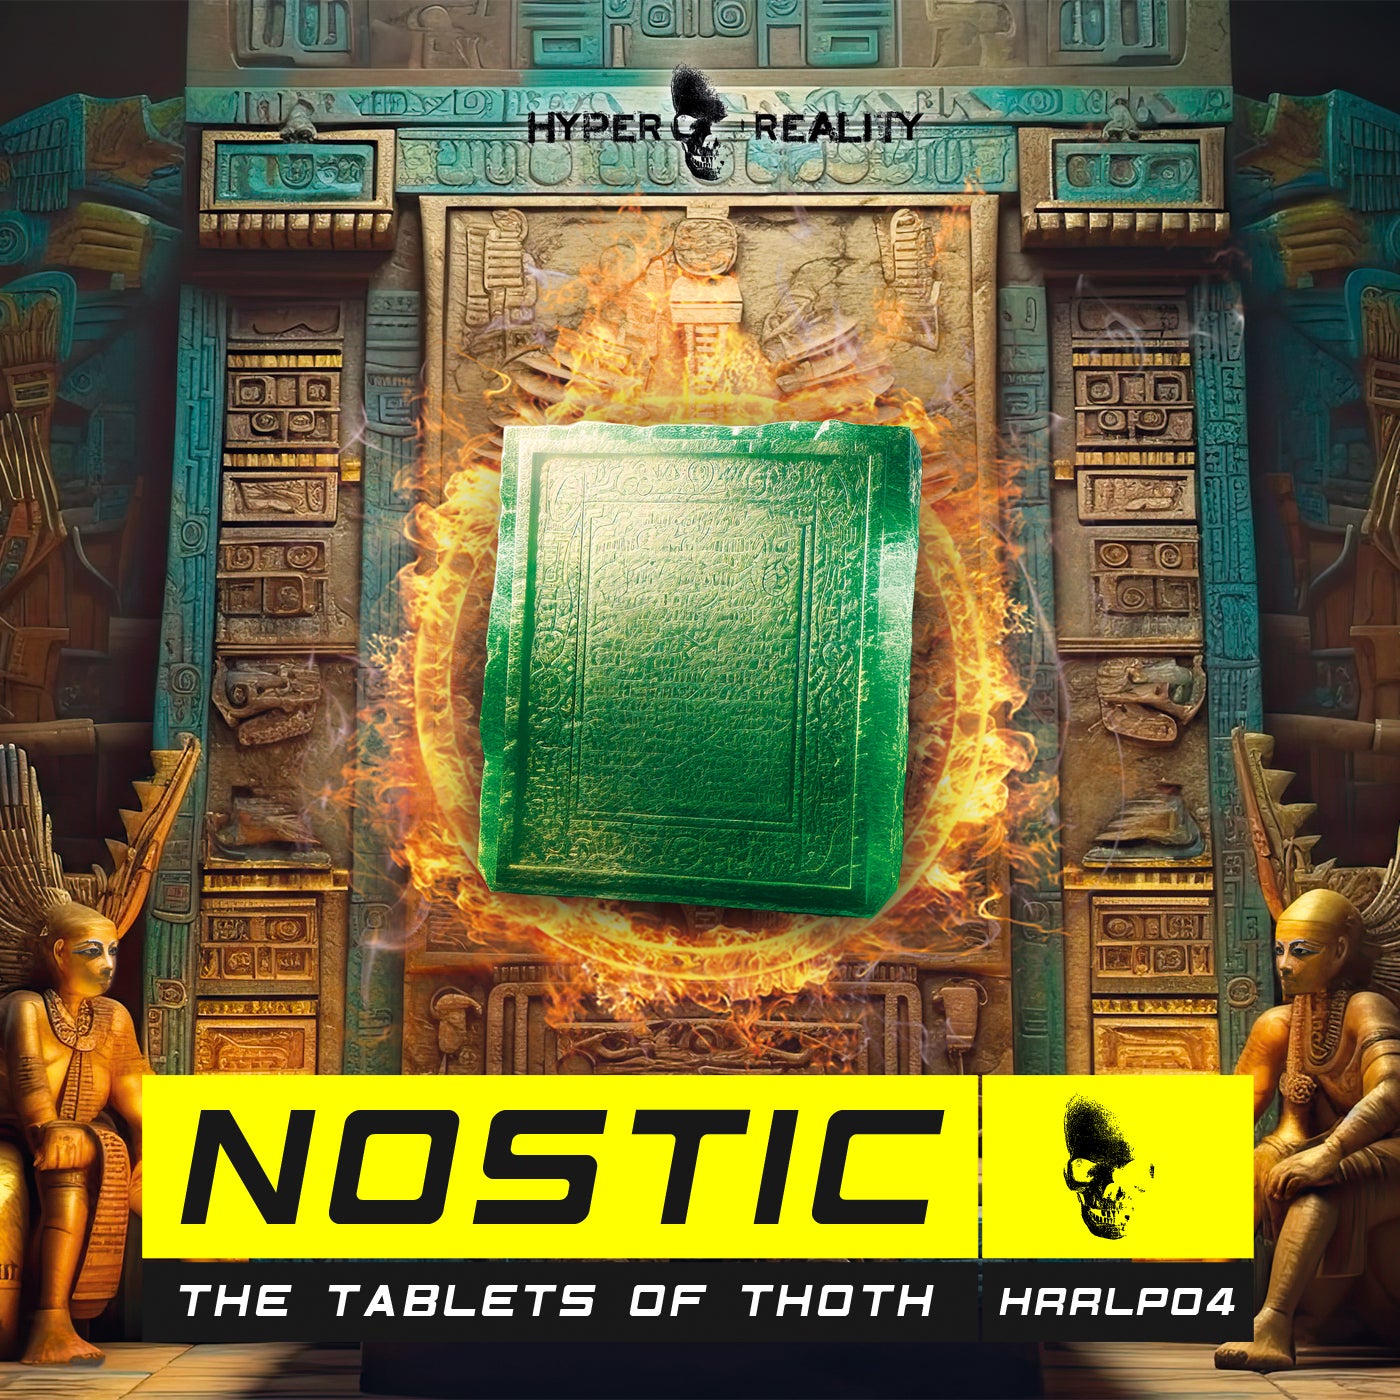 The Tablets of Thoth